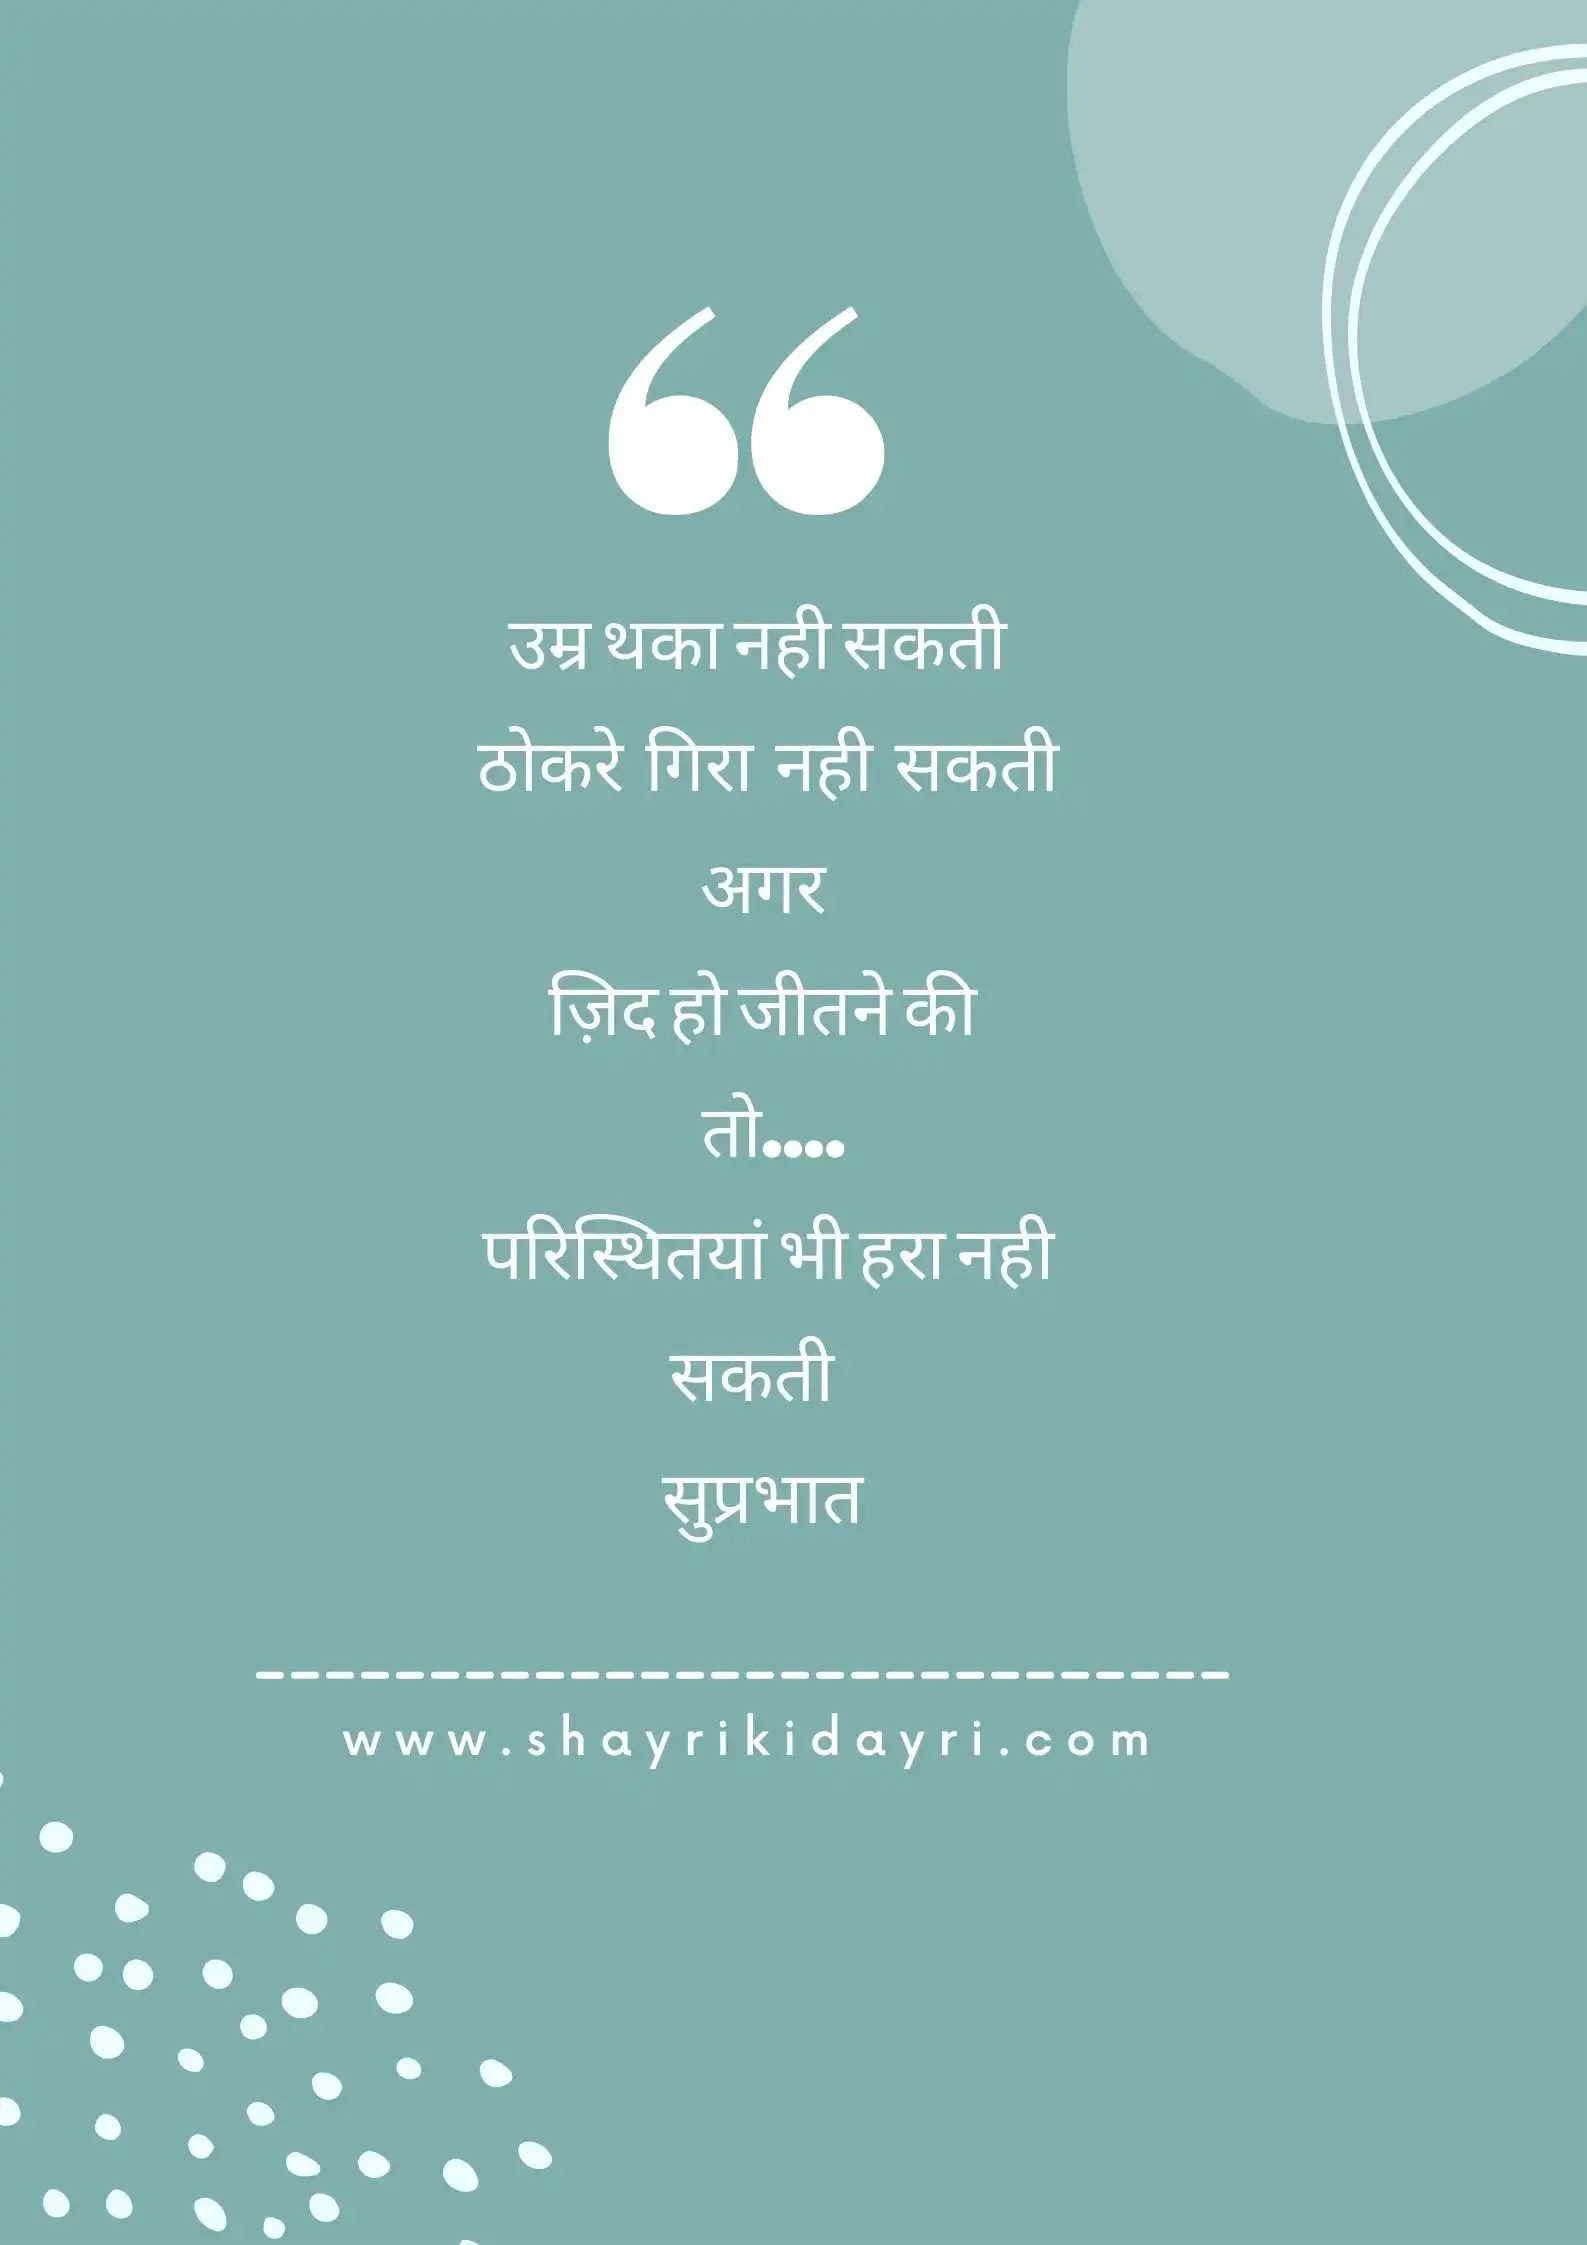 suprabhat message in hindi